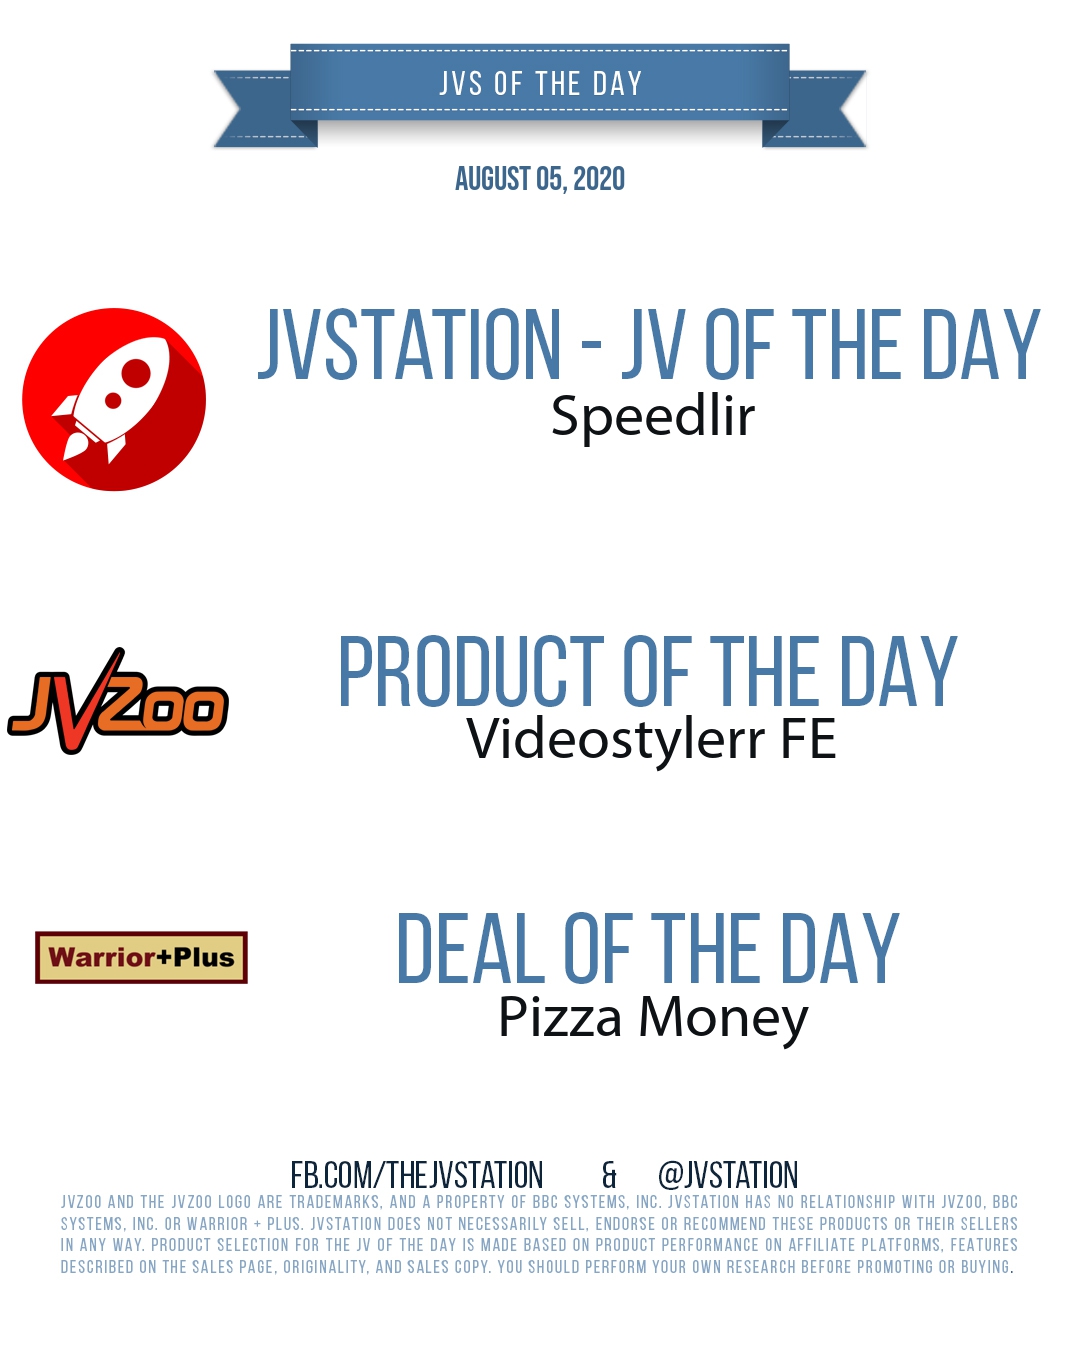 JVs of the day - August 05, 2020